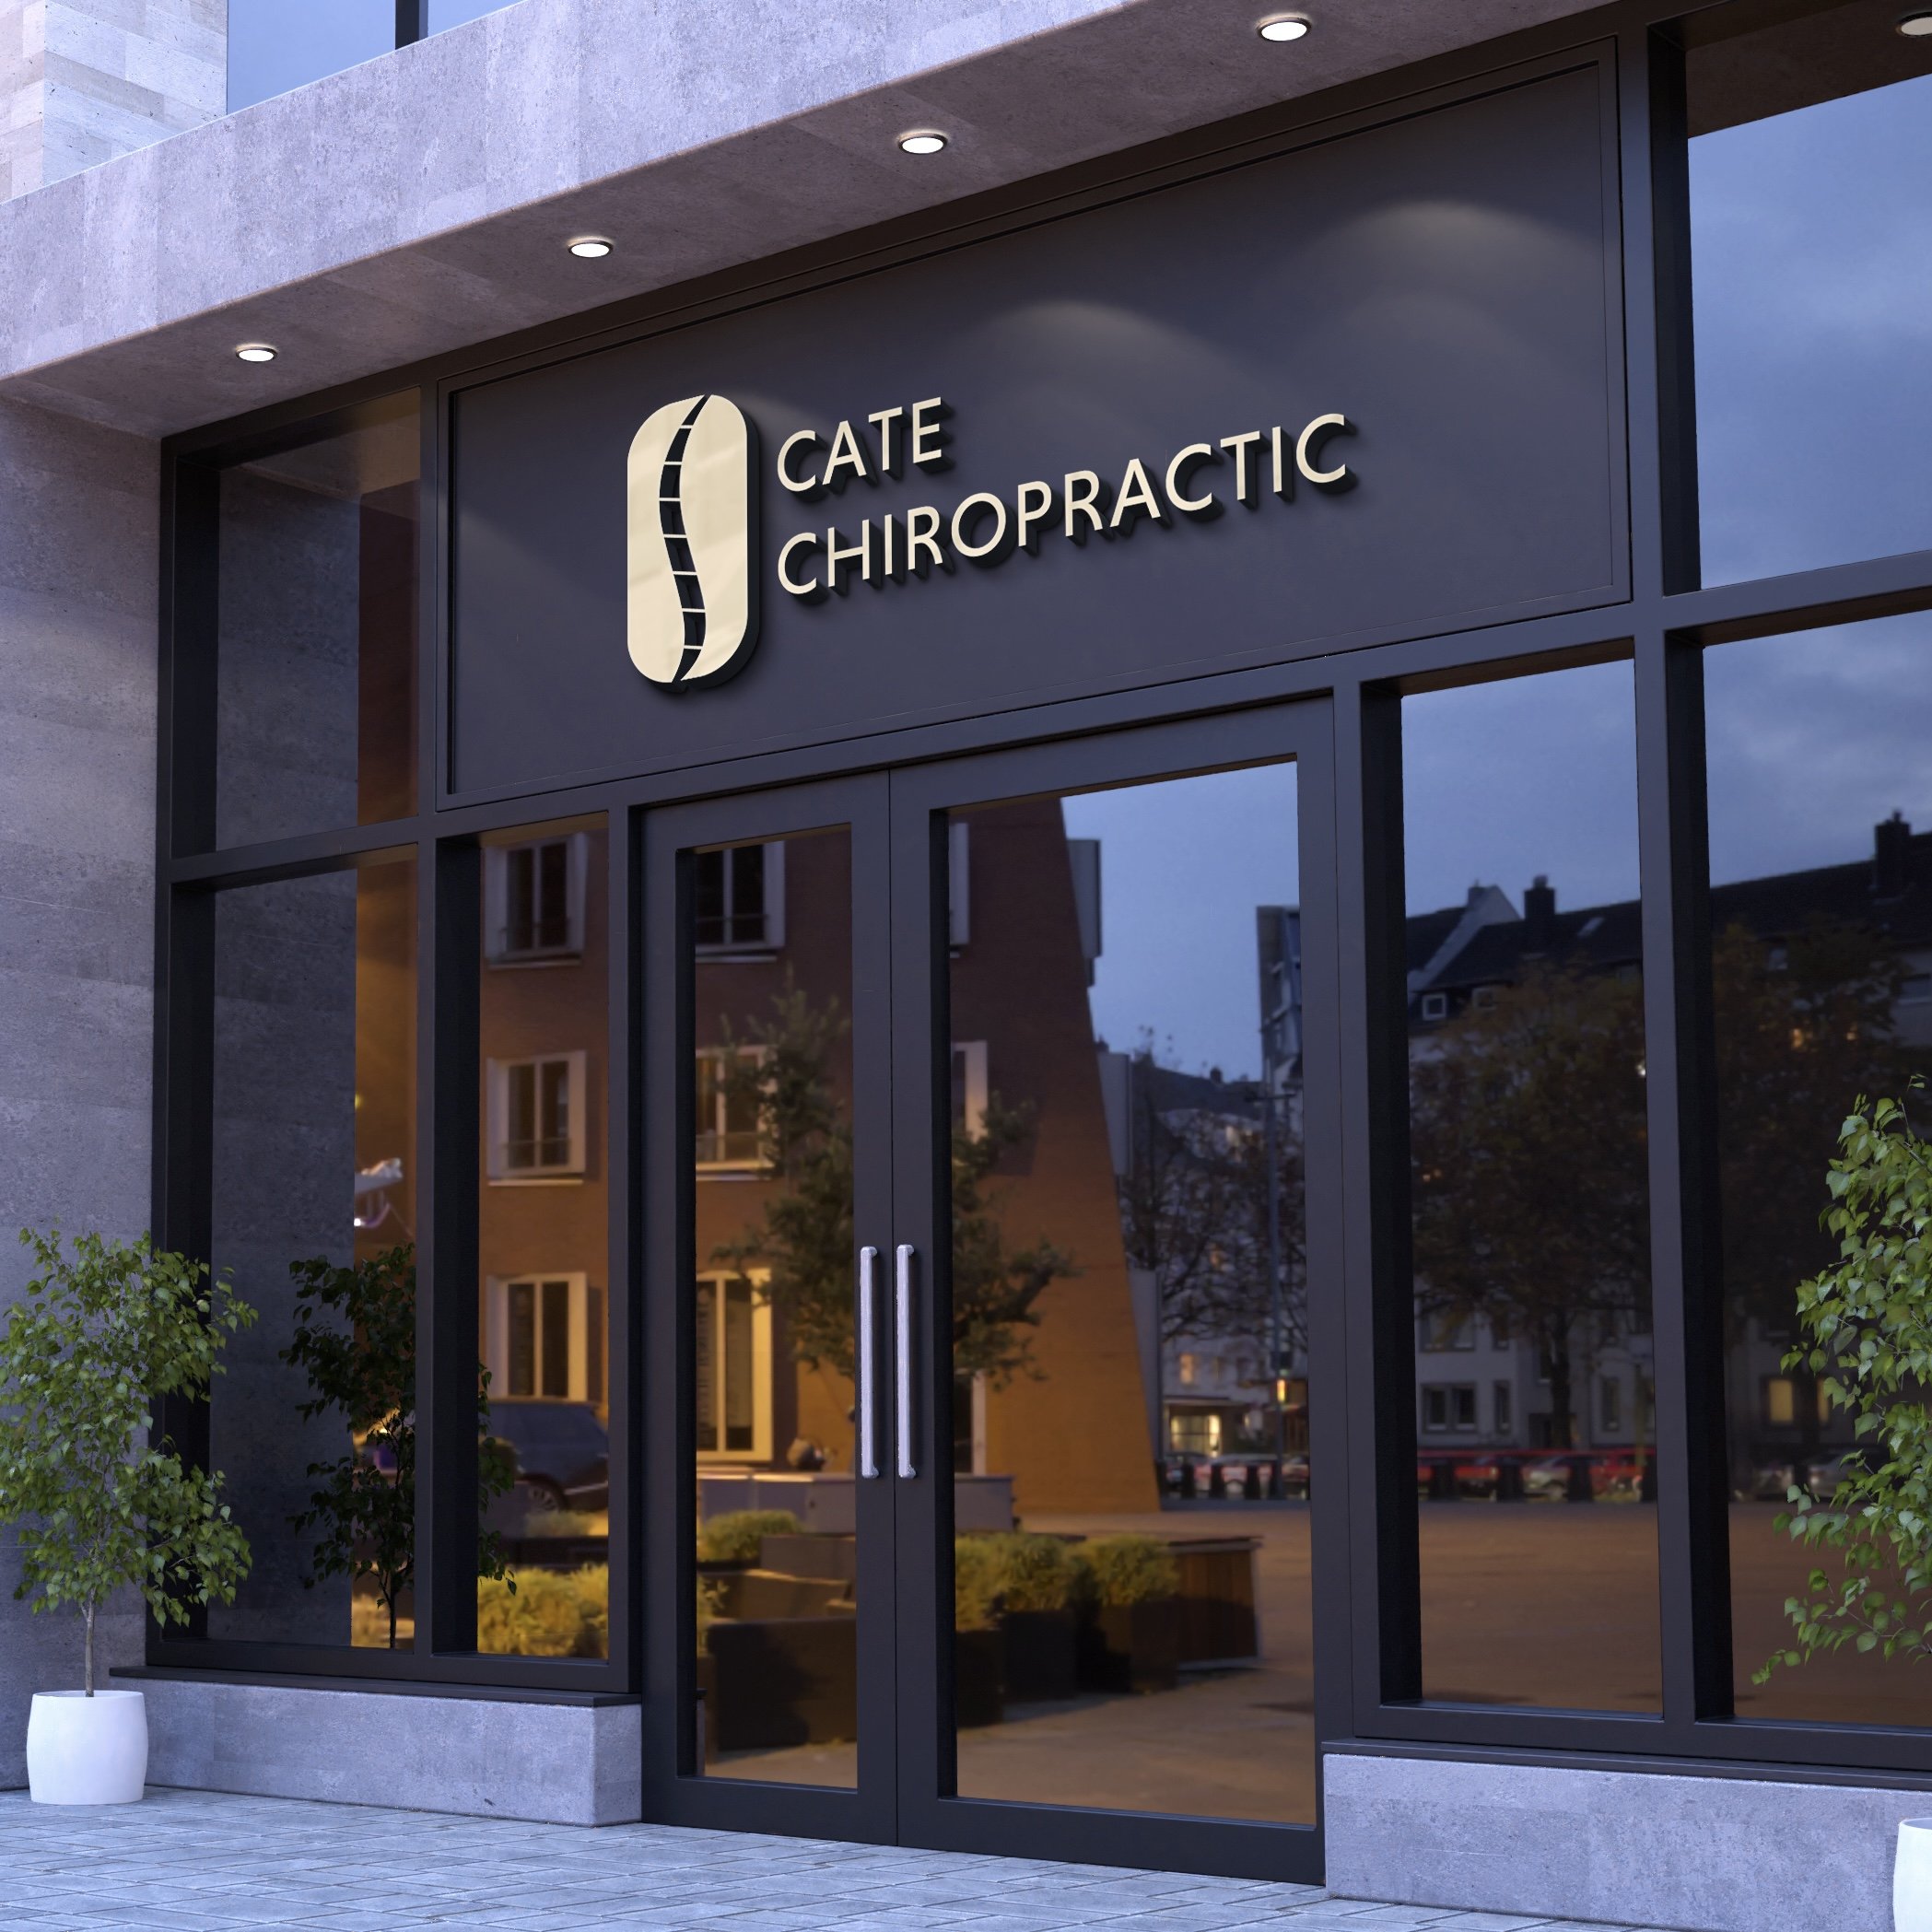 Cate-Chiropractic-Beyond-Design-Co11.jpeg